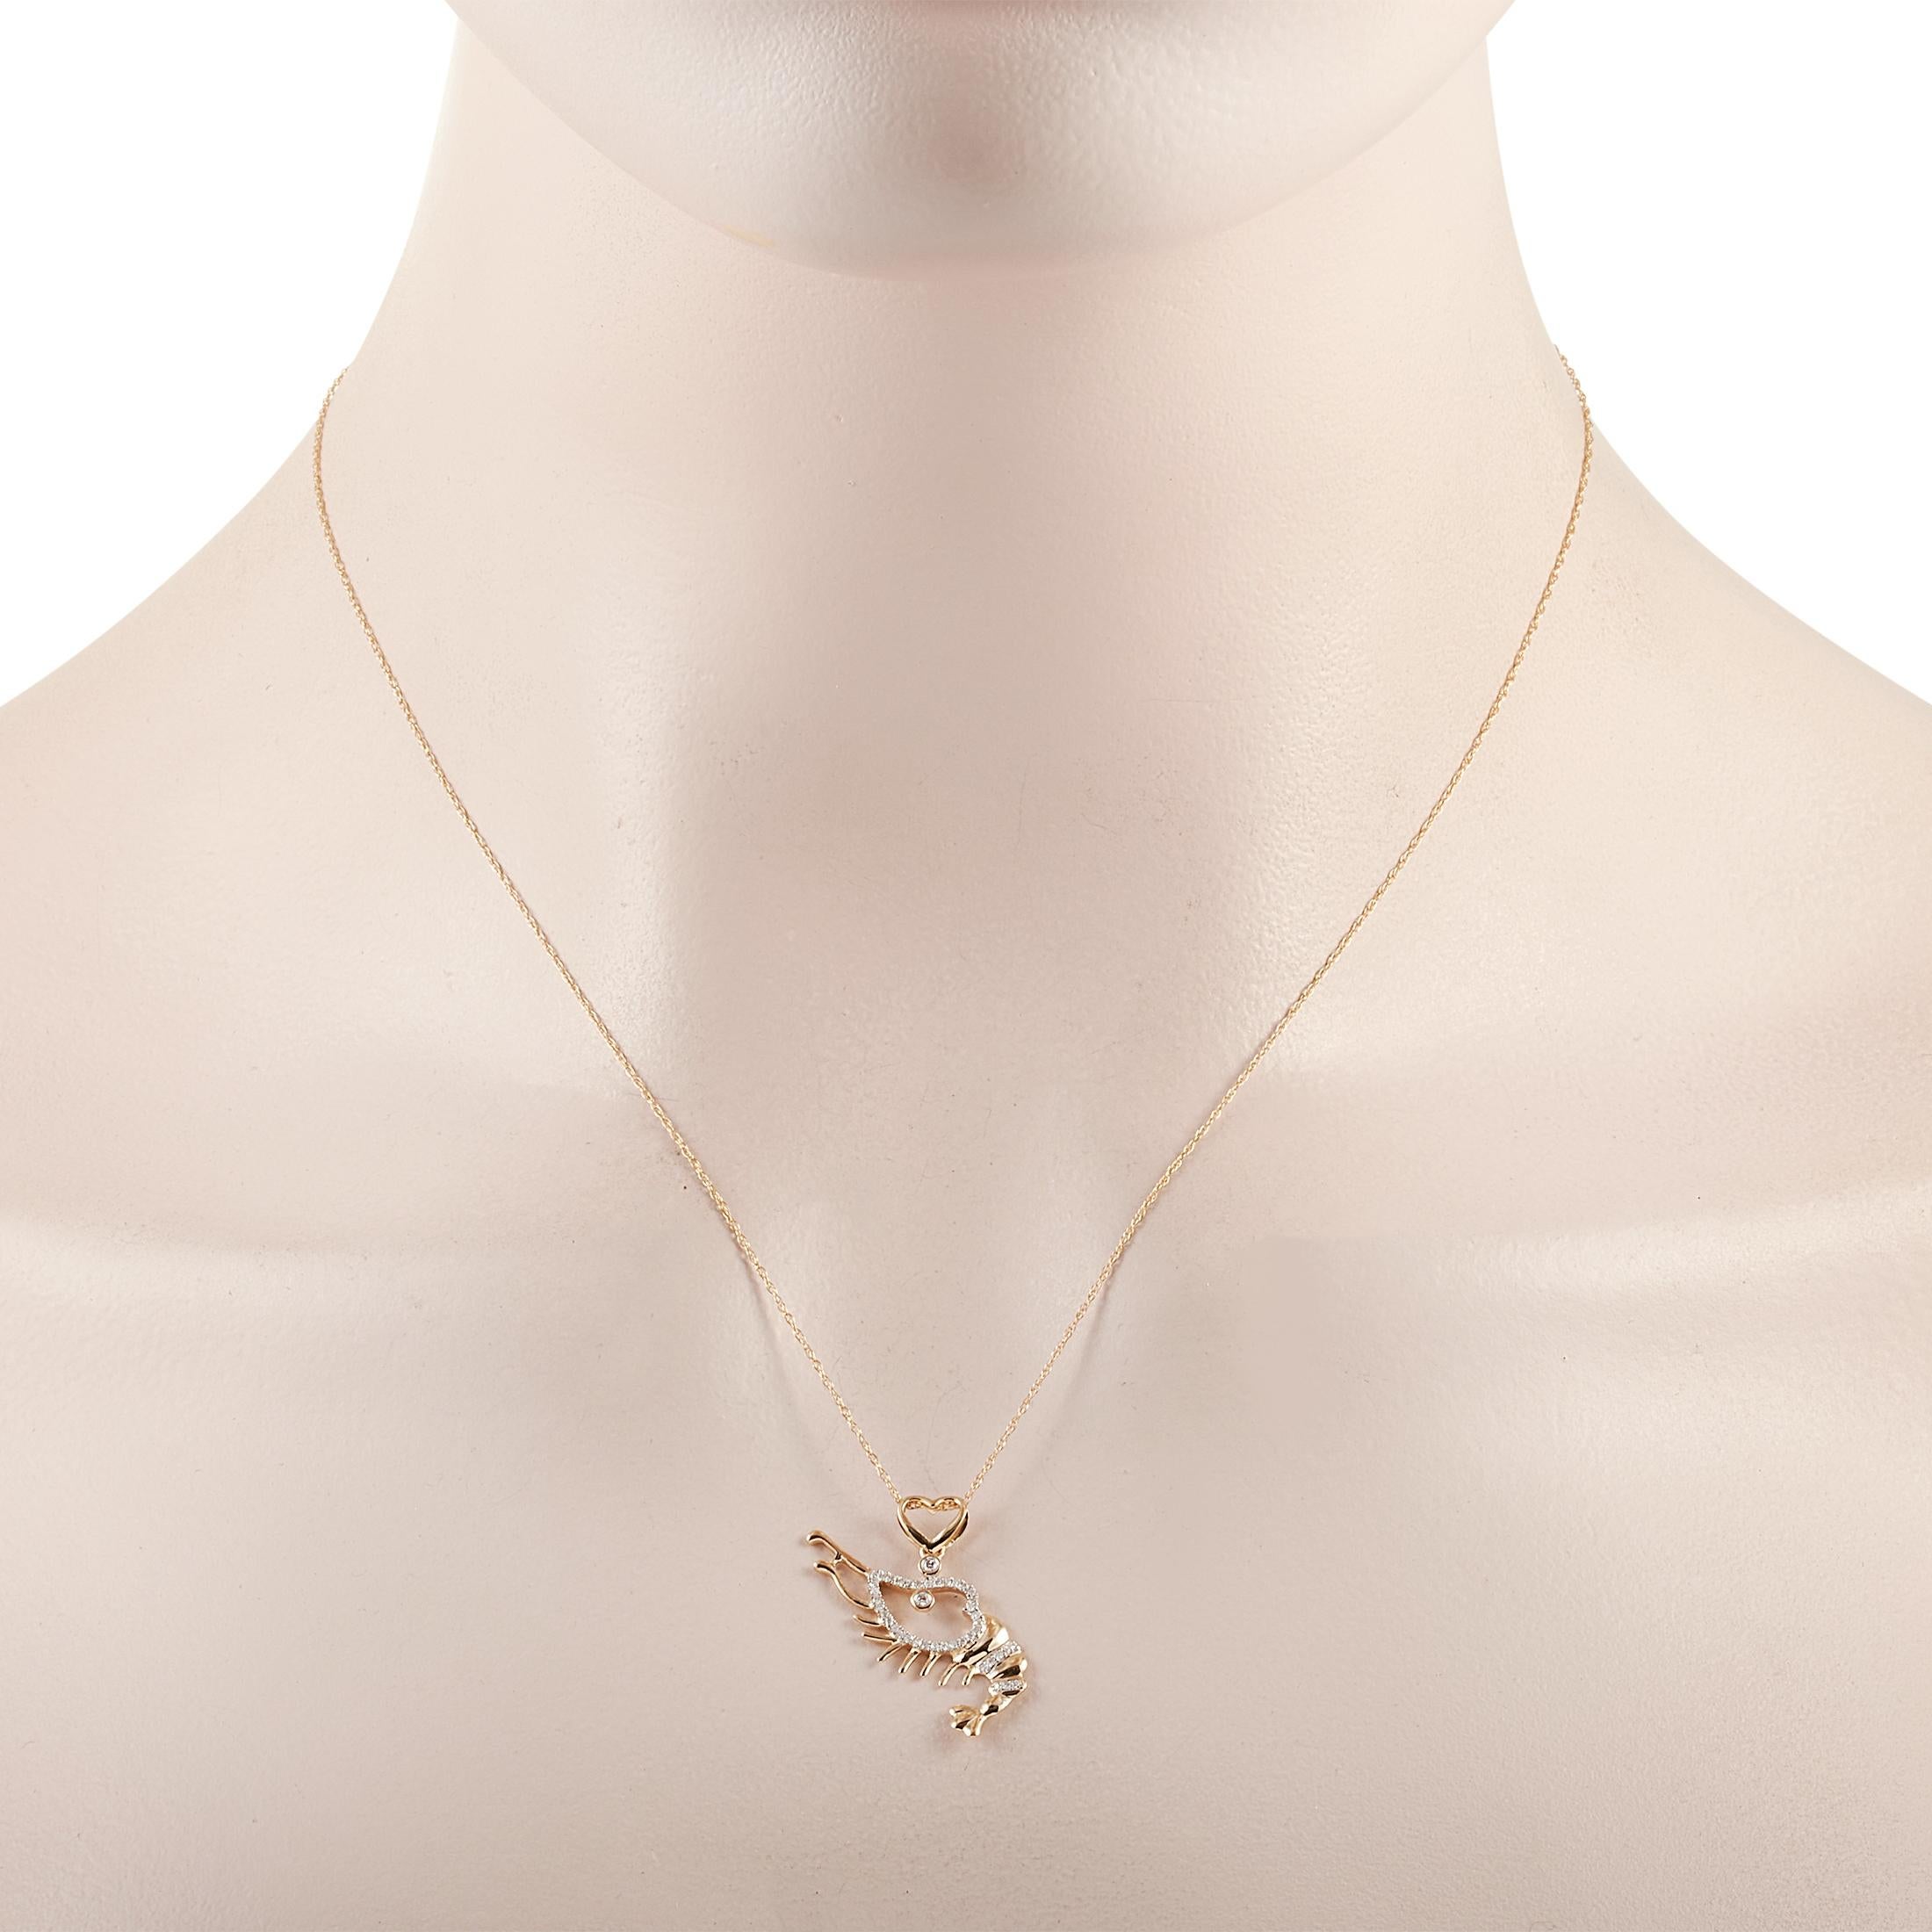 This LB Exclusive necklace is made of 14K yellow gold and embellished with diamonds that amount to 0.14 carats. The necklace weighs 1.9 grams and boasts a 16” chain and a pendant that measures 1” in length and 0.50” in width.
 
 Offered in brand new